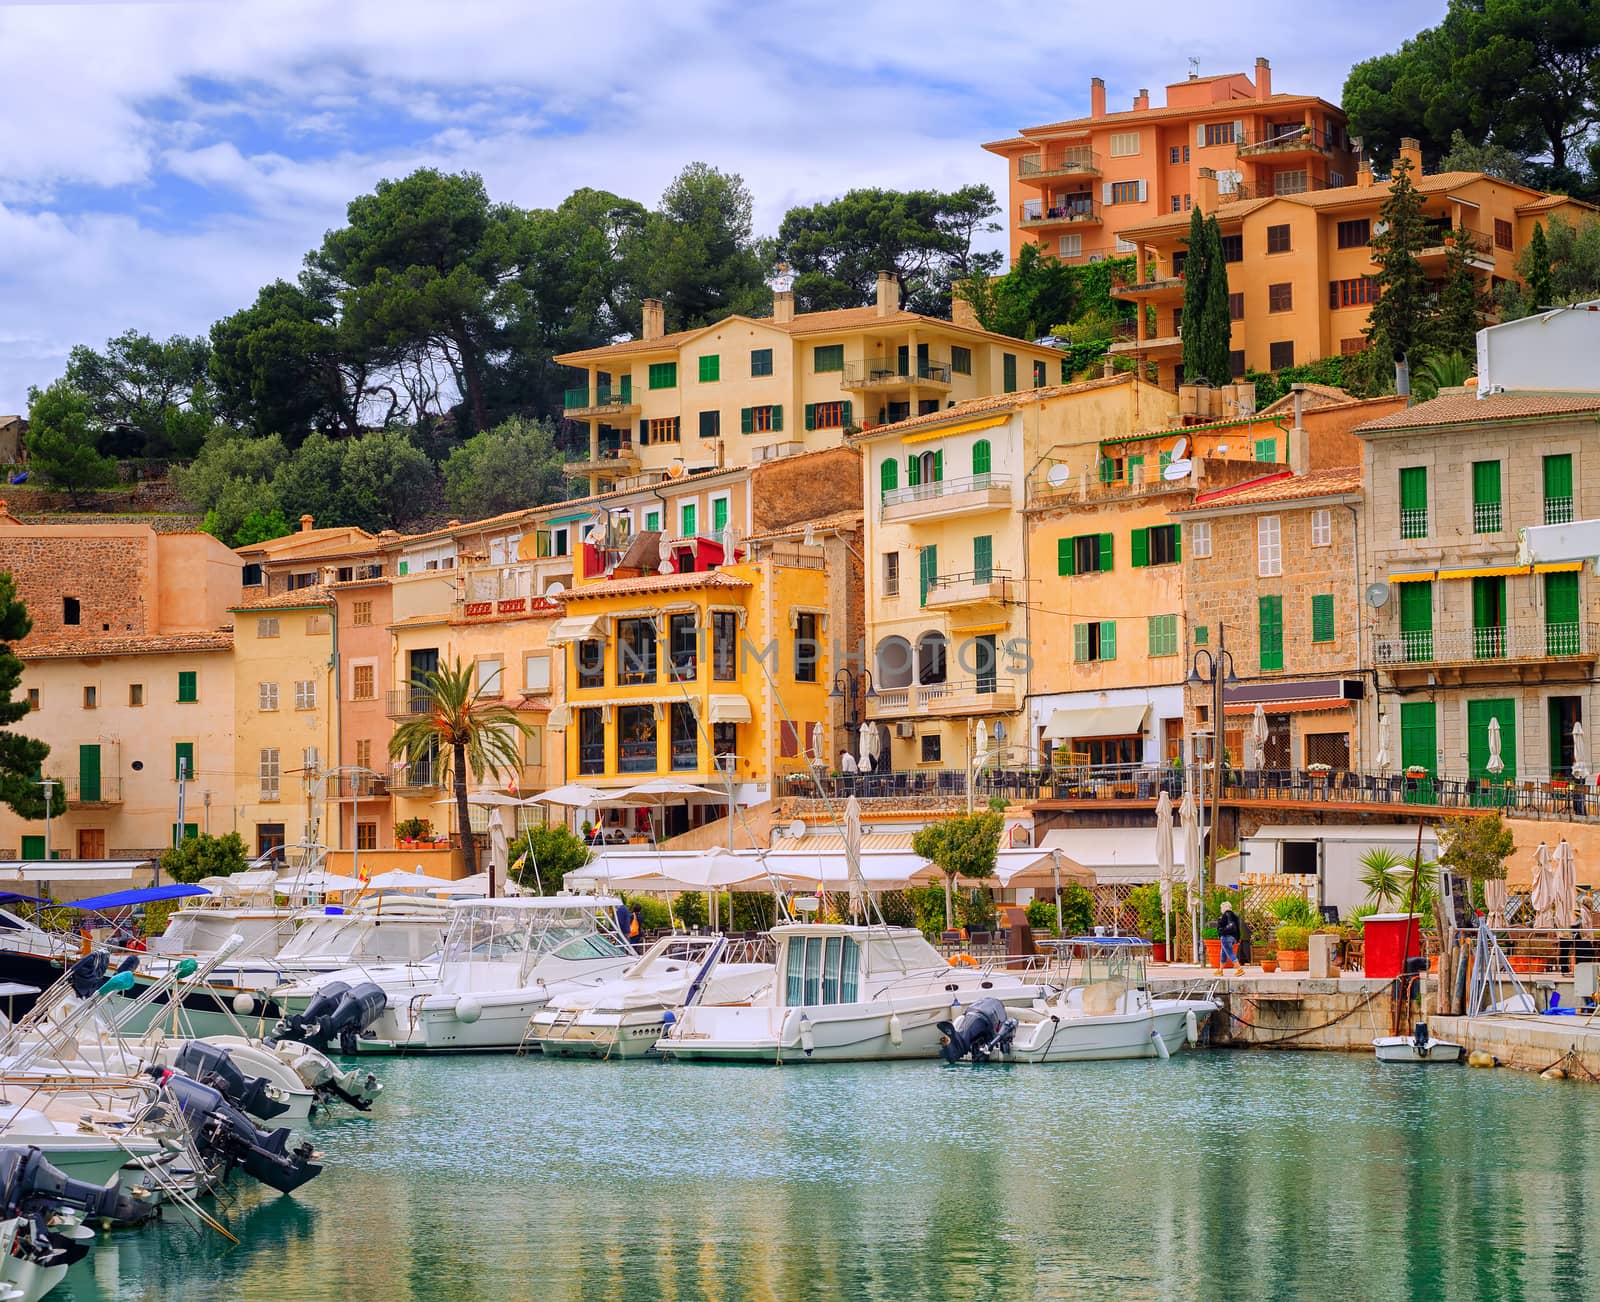 Motor boats and traditional waterside houses in Puerto Soller, Mallorca, Spain